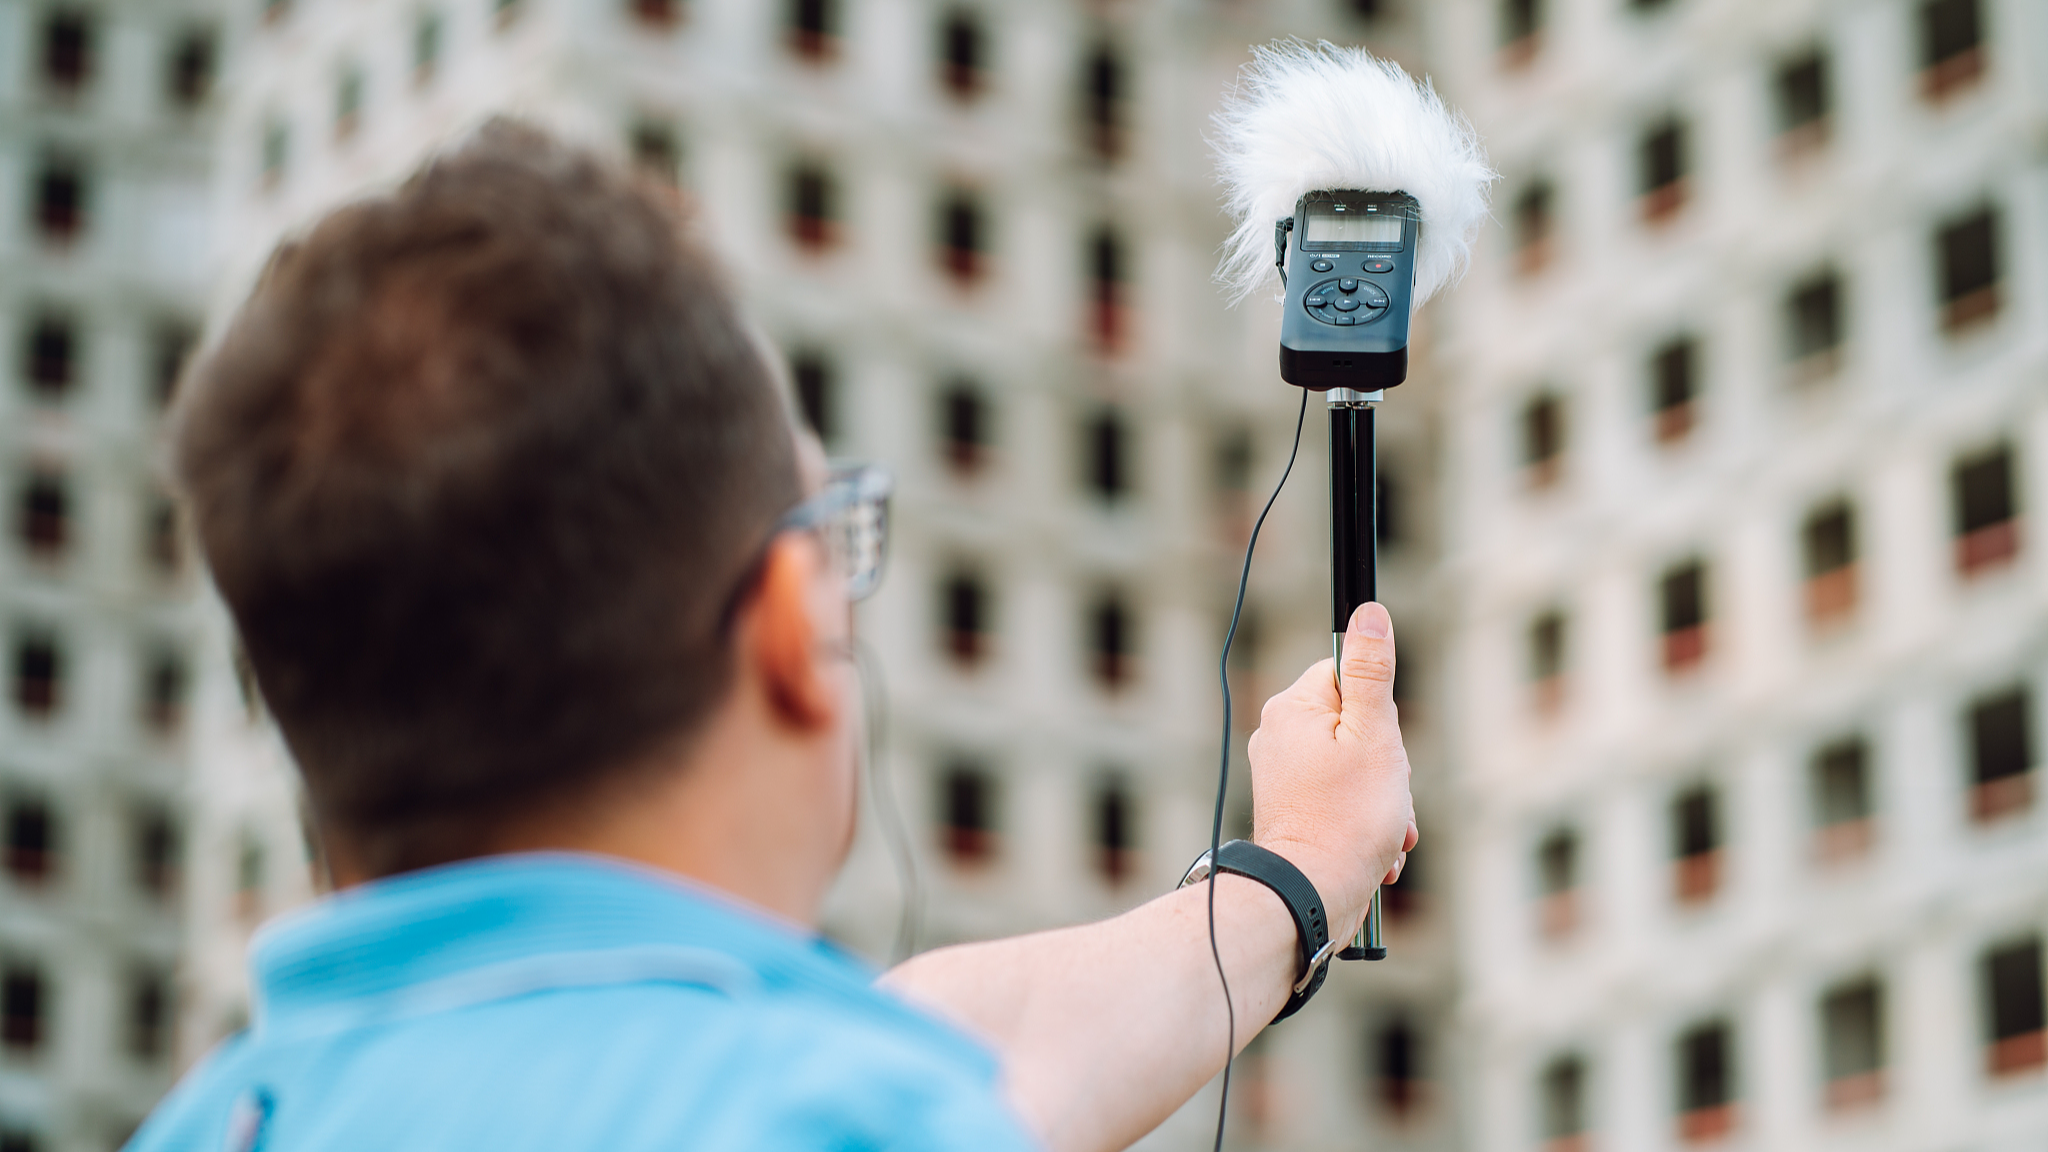 To help distinguish the natural sounds and real noises, the China National Environmental Monitoring Center (CNEMC) has launched the construction of an urban noise measurement database this year. /CFP